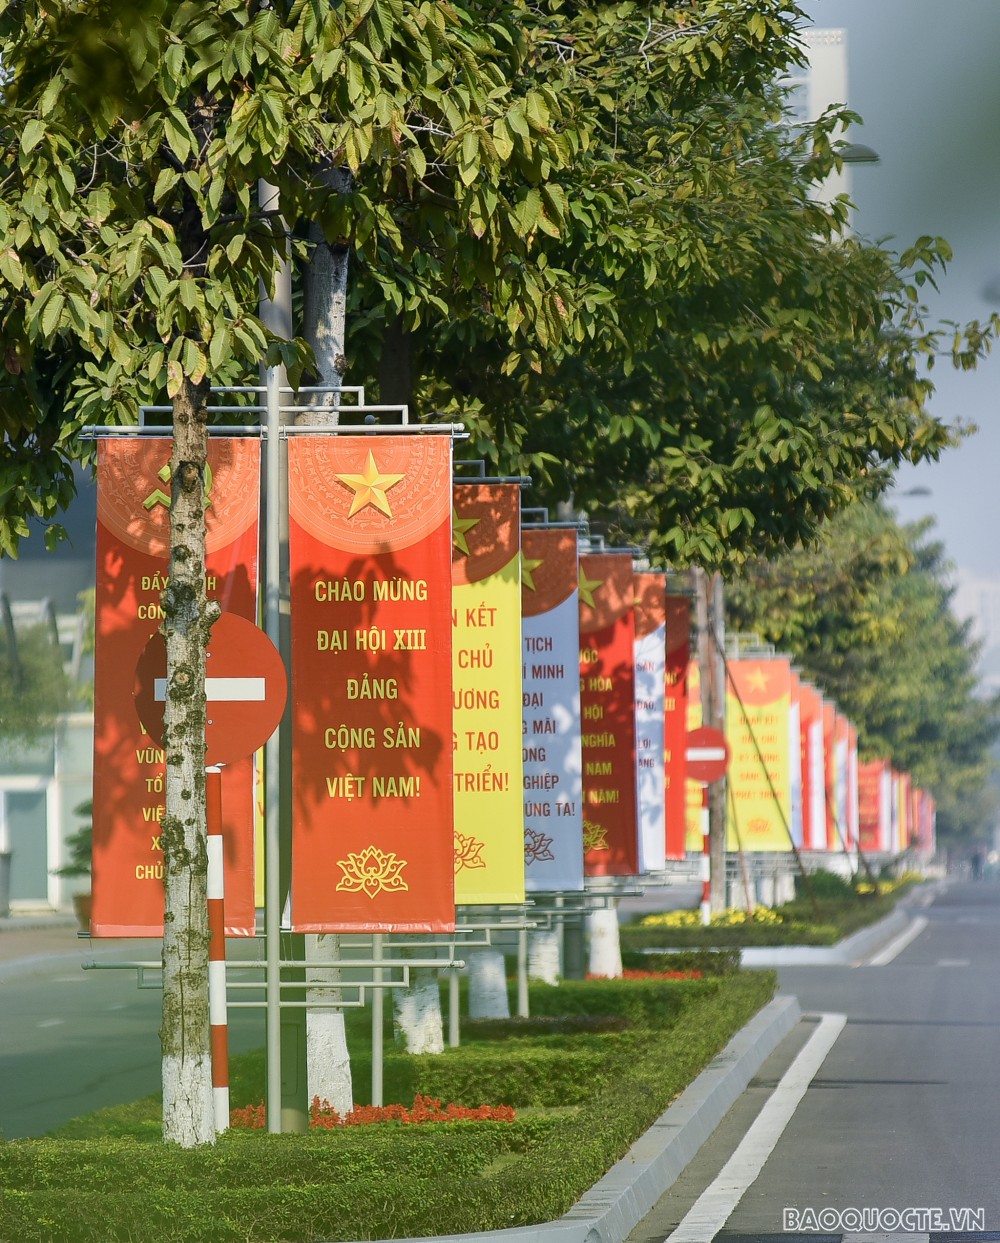 Ha Noi radiantly decorated to welcome upcoming National Party Congress